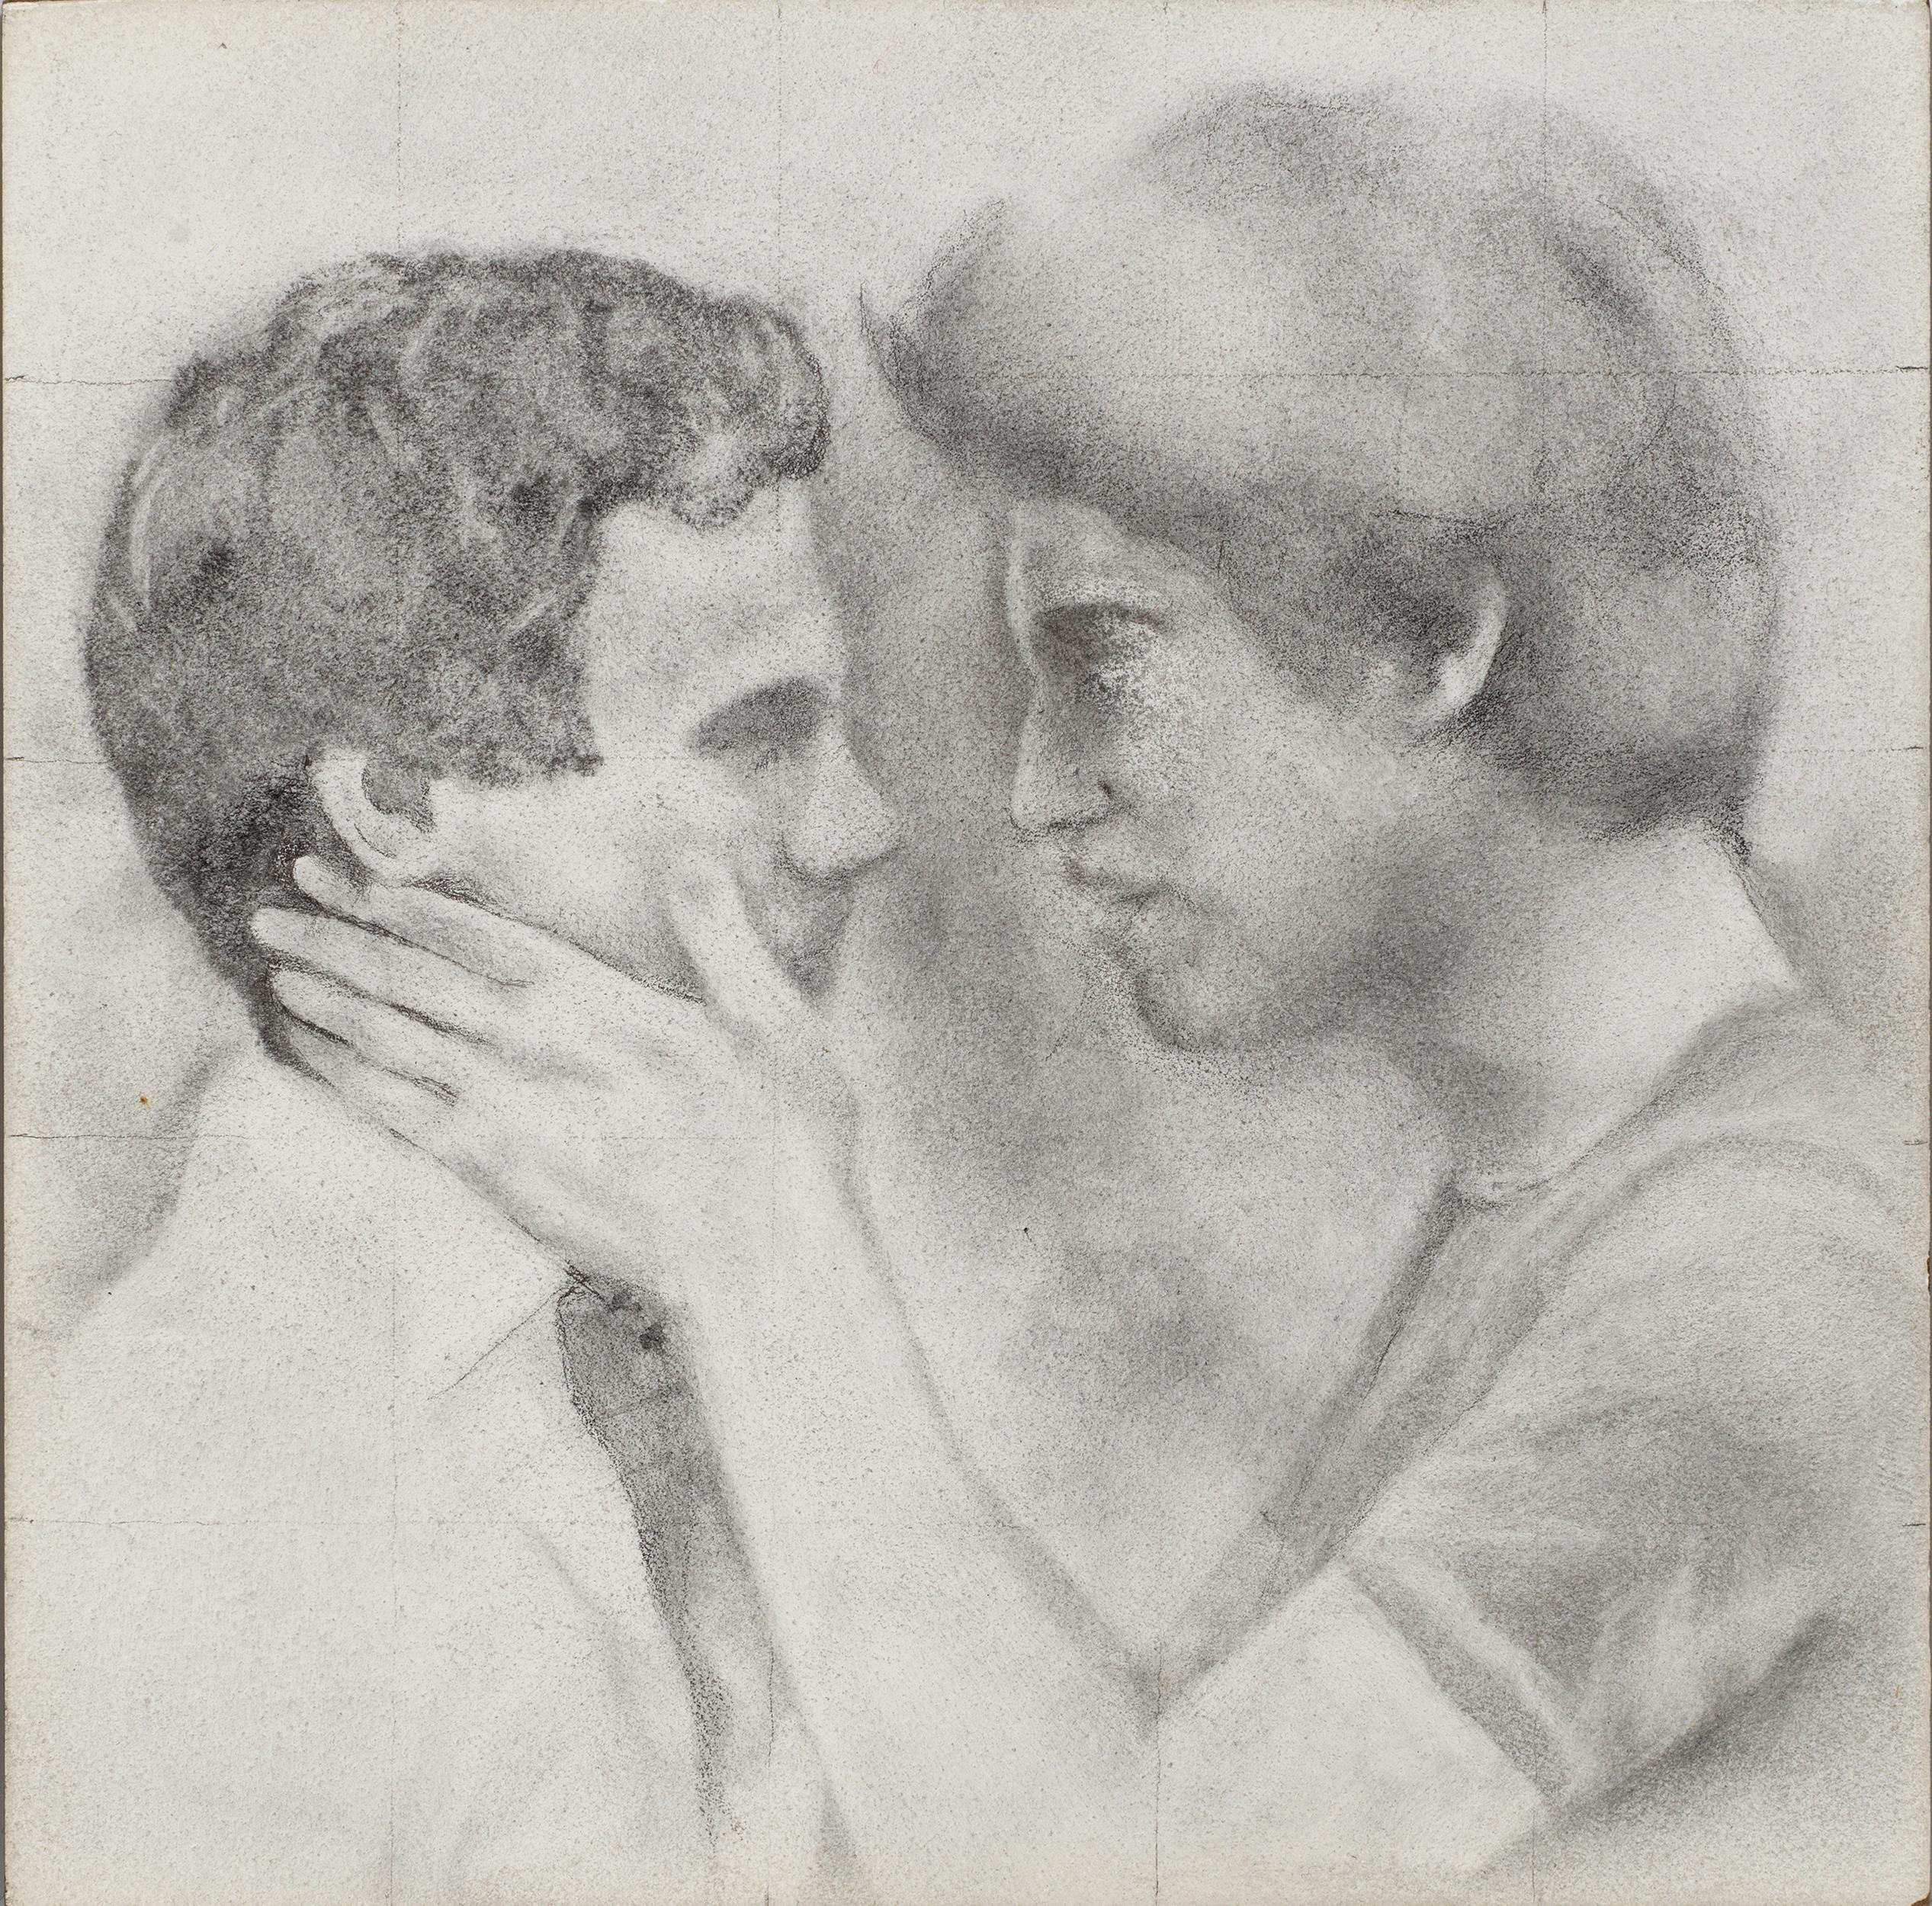 Held - Male Figures Embracing Each Other, Original Graphite on Panel Drawing